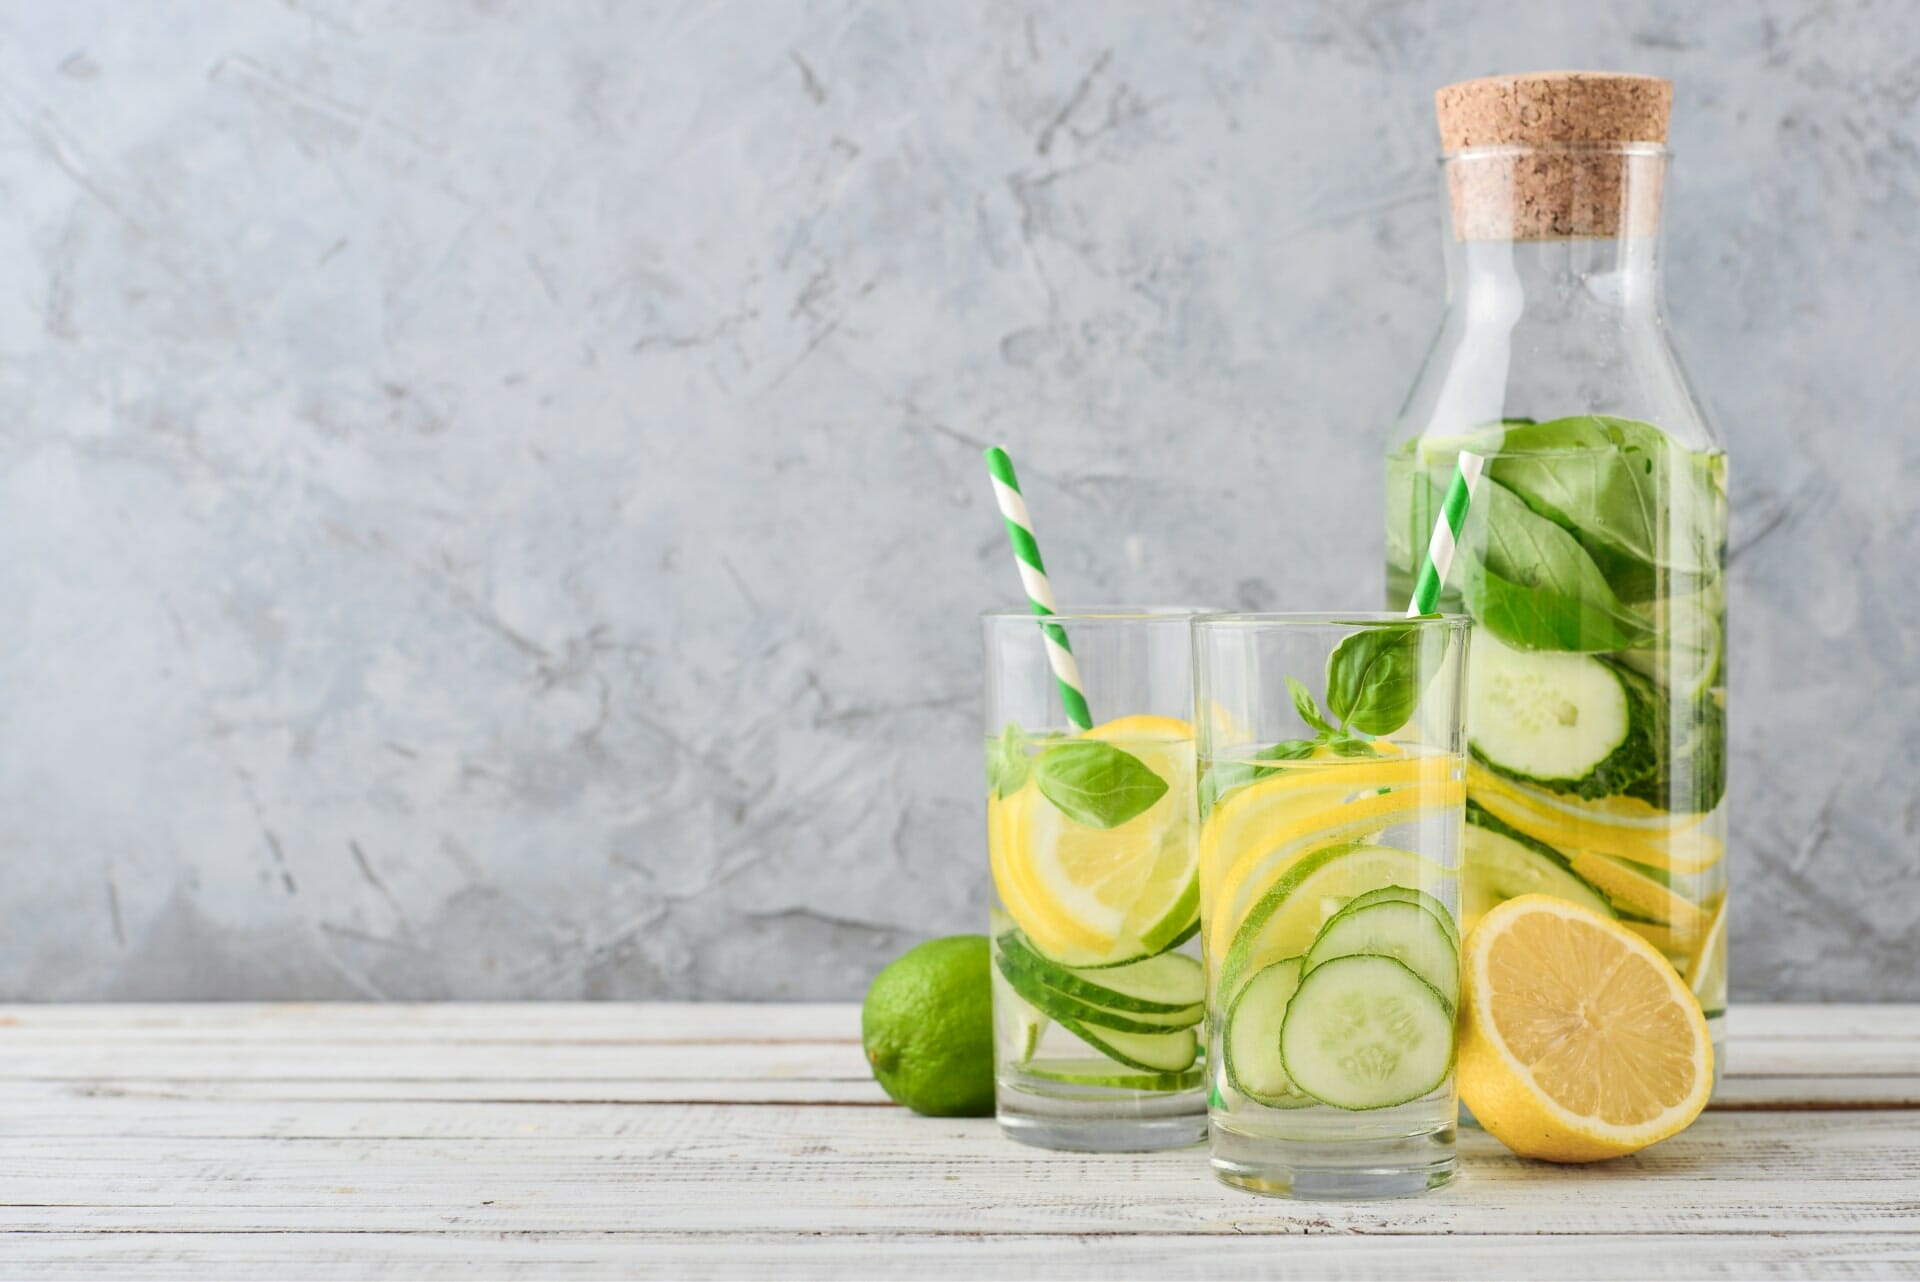 Lemon Water Detox: A Simple Way to Flush Out Toxins